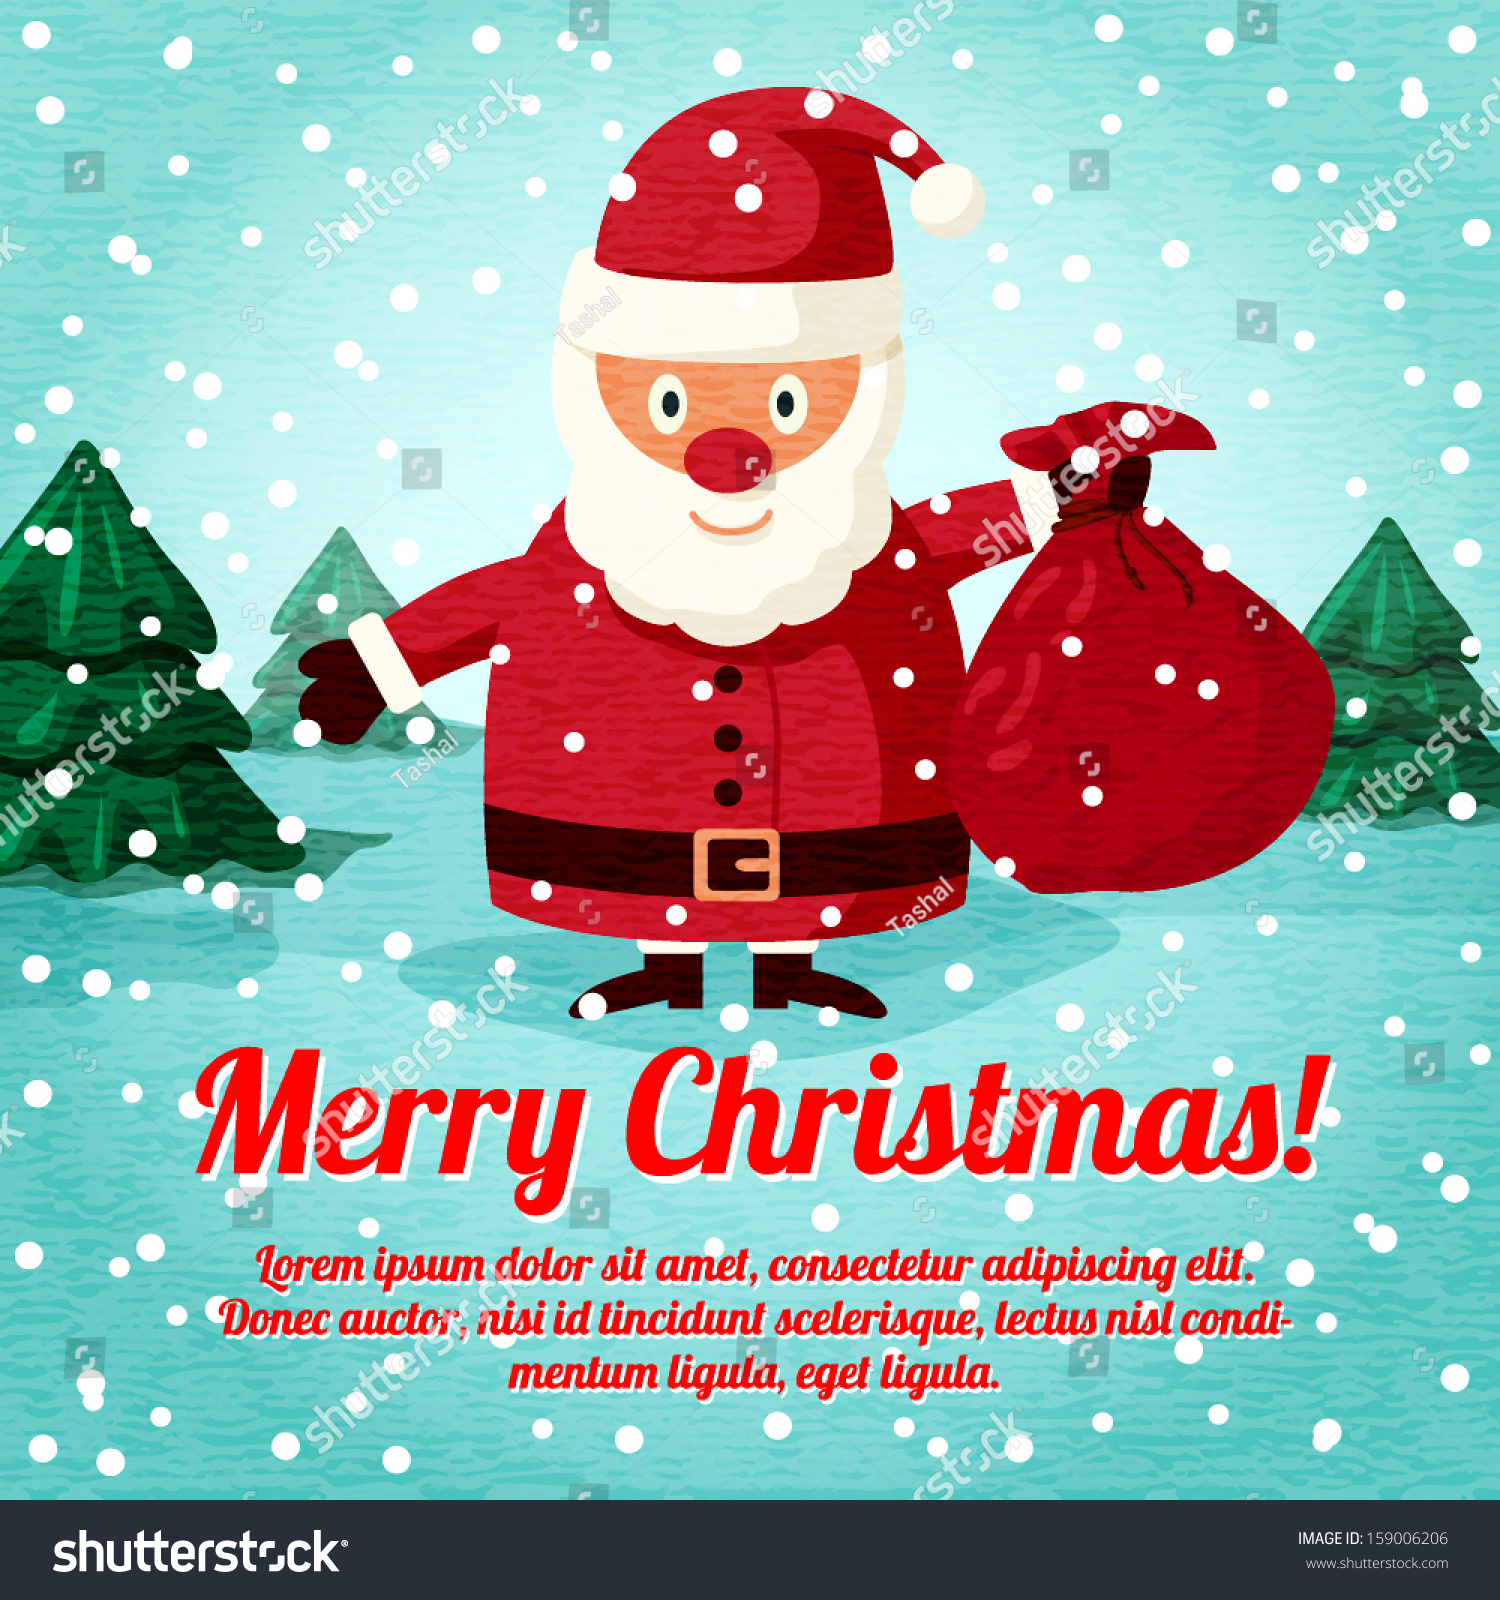 Merry Christmas Greeting Card With Place For Your Text. Santa Claus ...